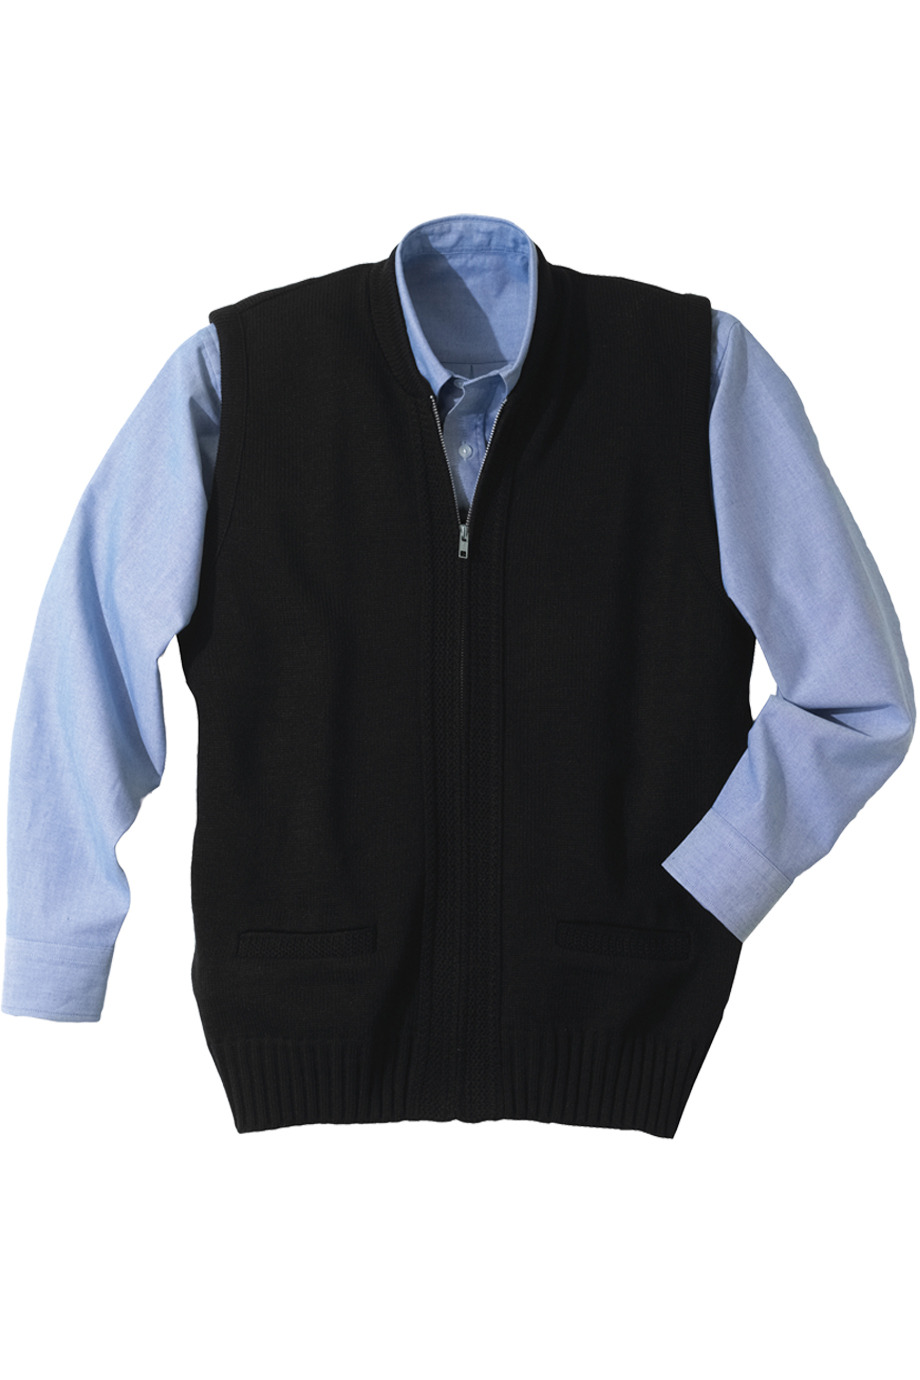 Wholesale Cotton Navy Sweater Vest - from $12.49